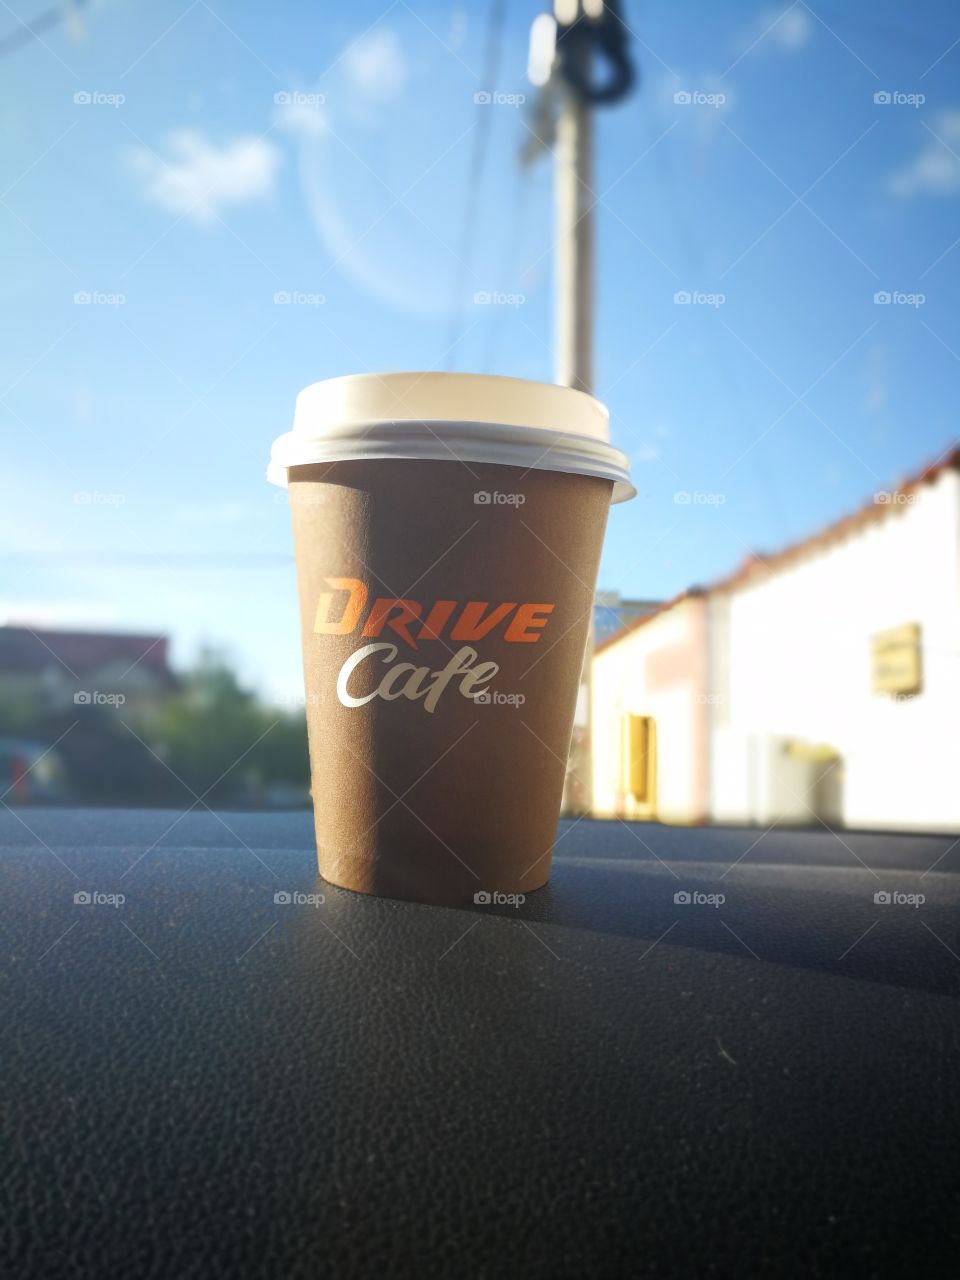 Drive cafe